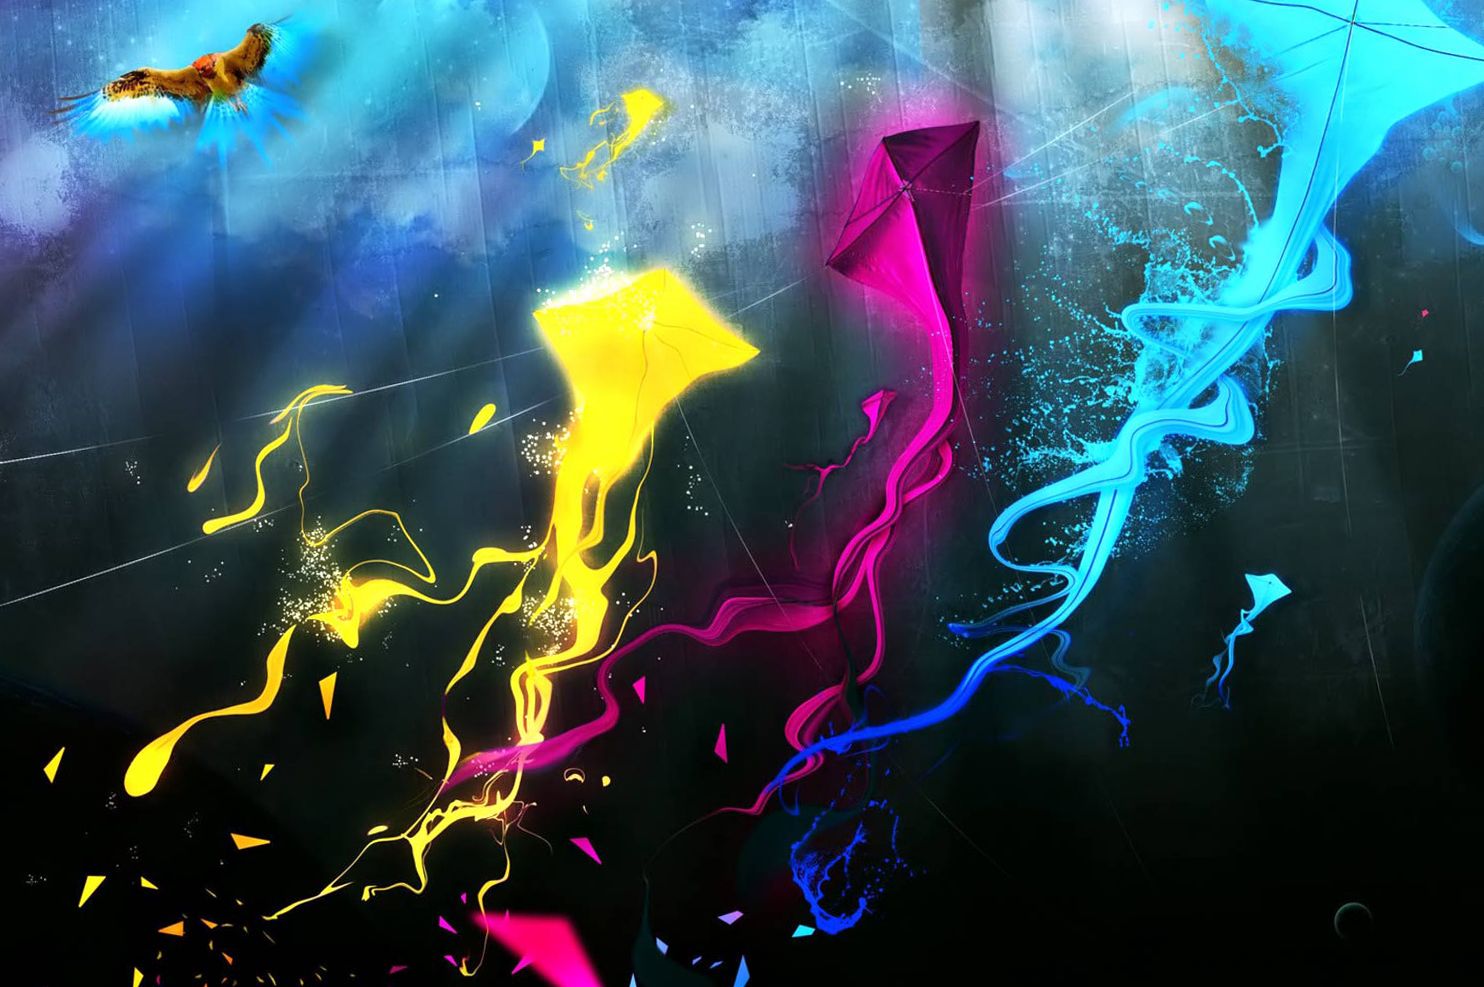 Hd Abstract Artworks, Art Wallpapers, Cool Desktop Images ...